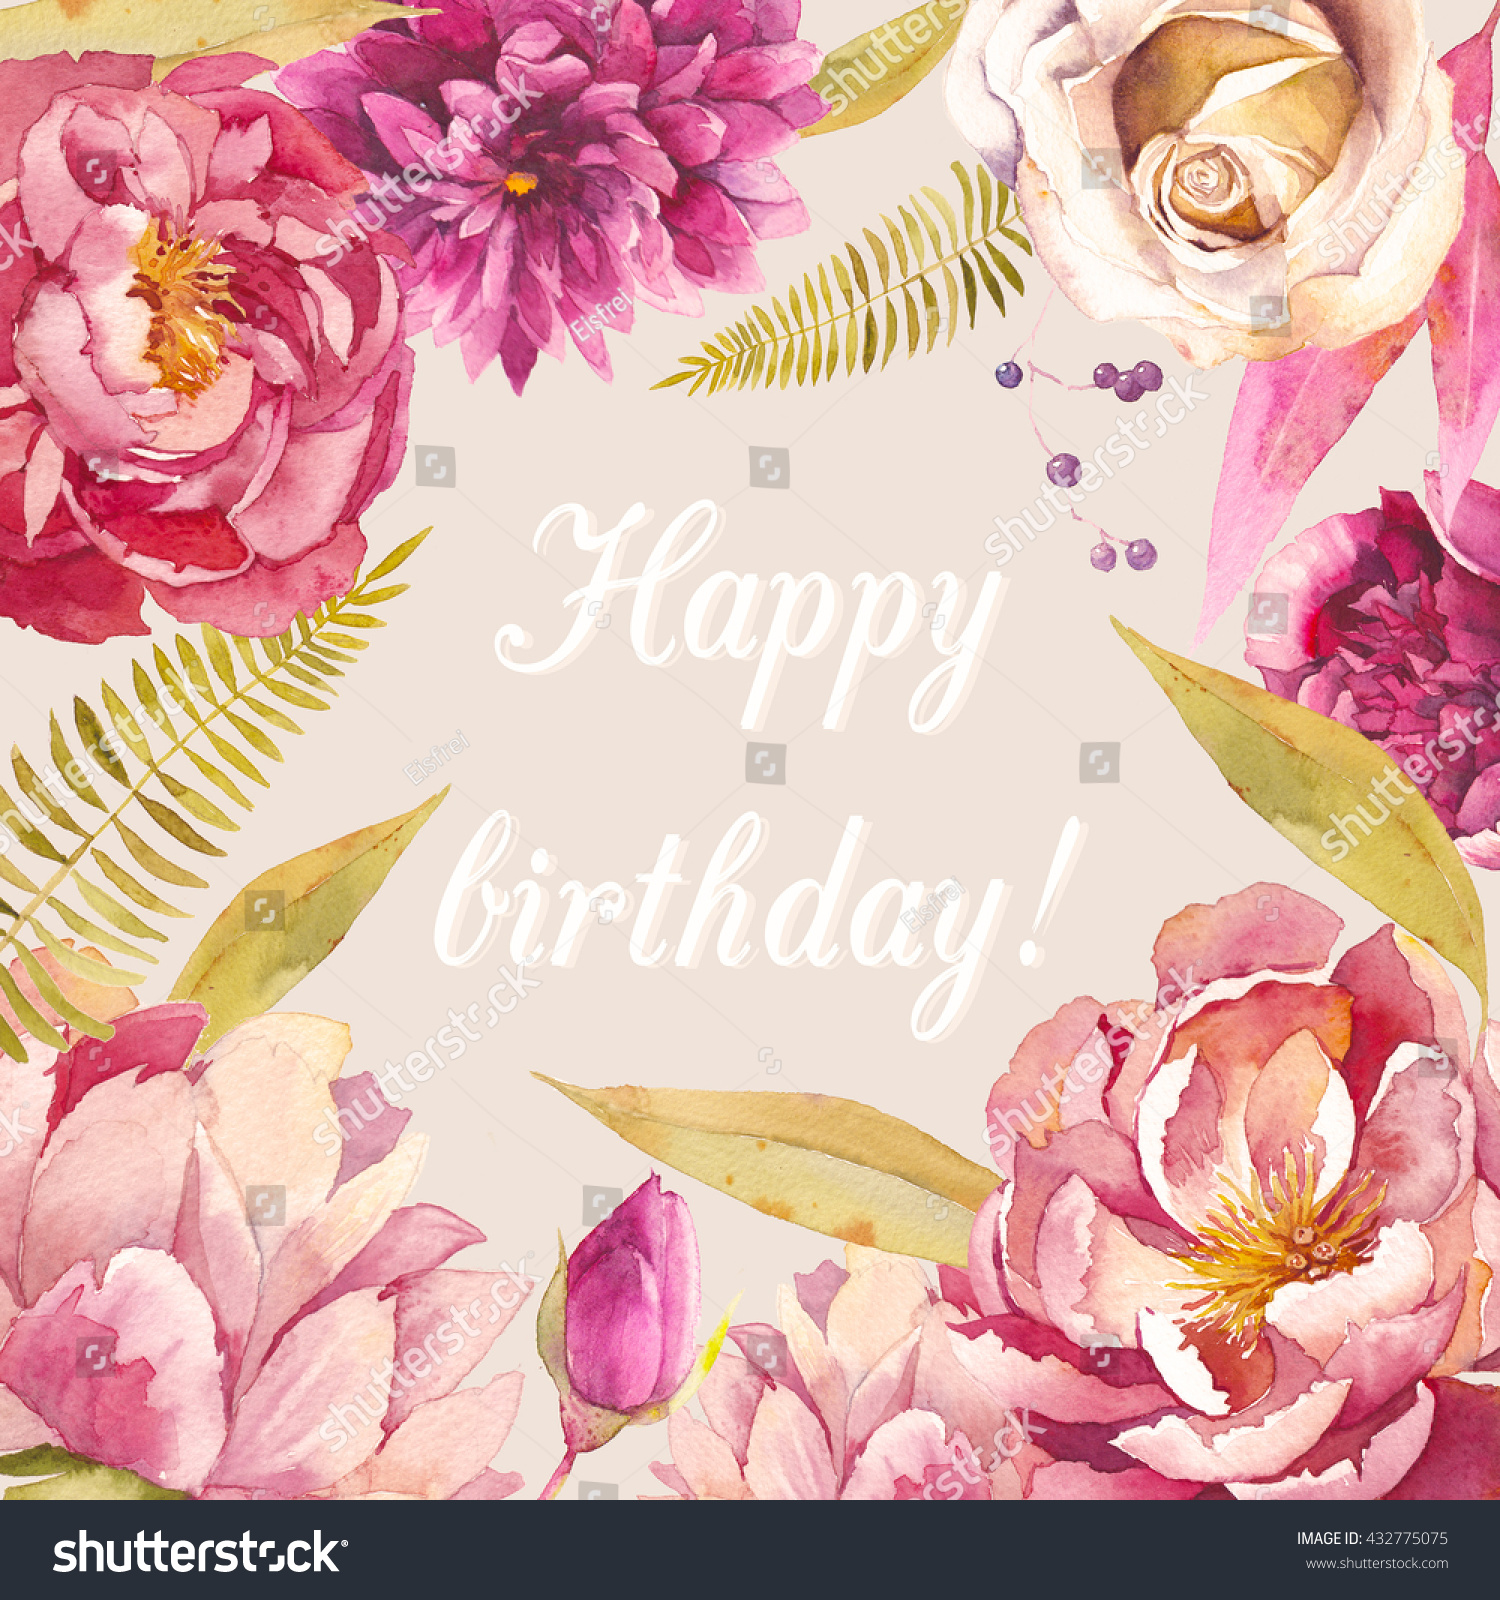 Watercolor Floral Frame. Hand Painted Happy Birthday Card Design With ...